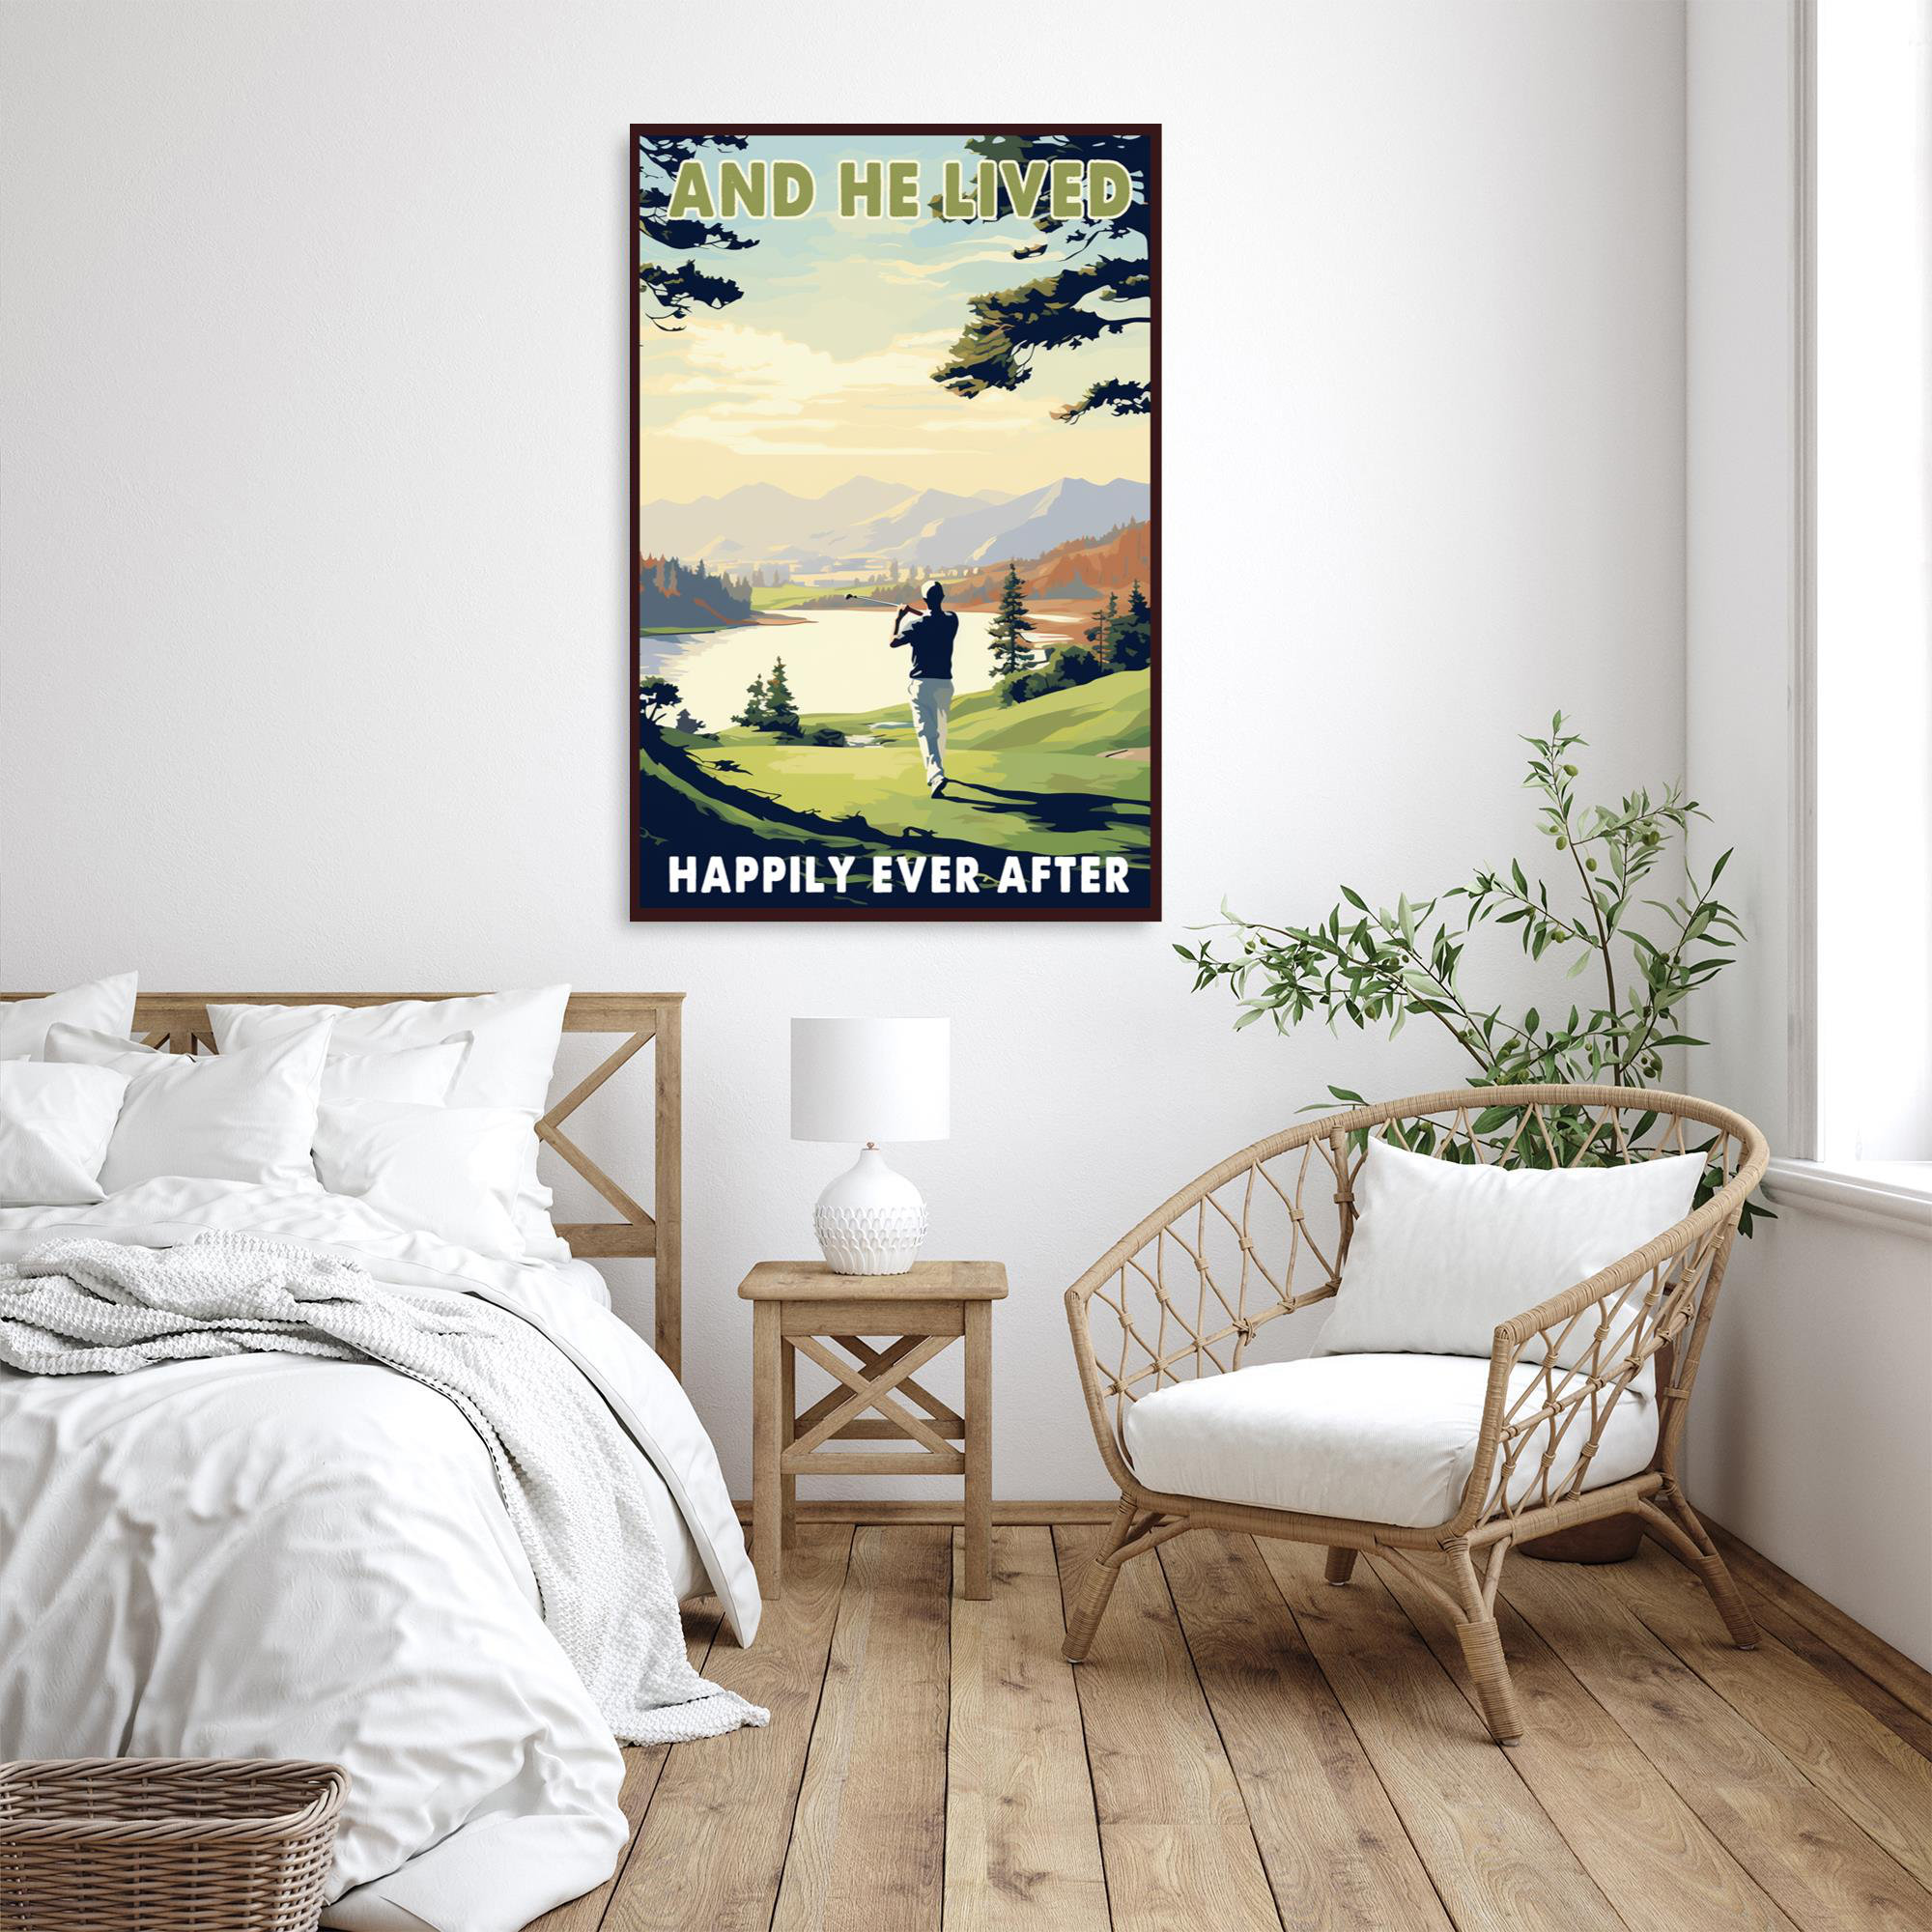 Trinx Golf And He Lived Happily Ever After - 1 Piece Rec Golf And He Lived  Happily Ever After - 1 Piece Rectangle Graphic Art Print On Wrapped Canvas  On Canvas Print